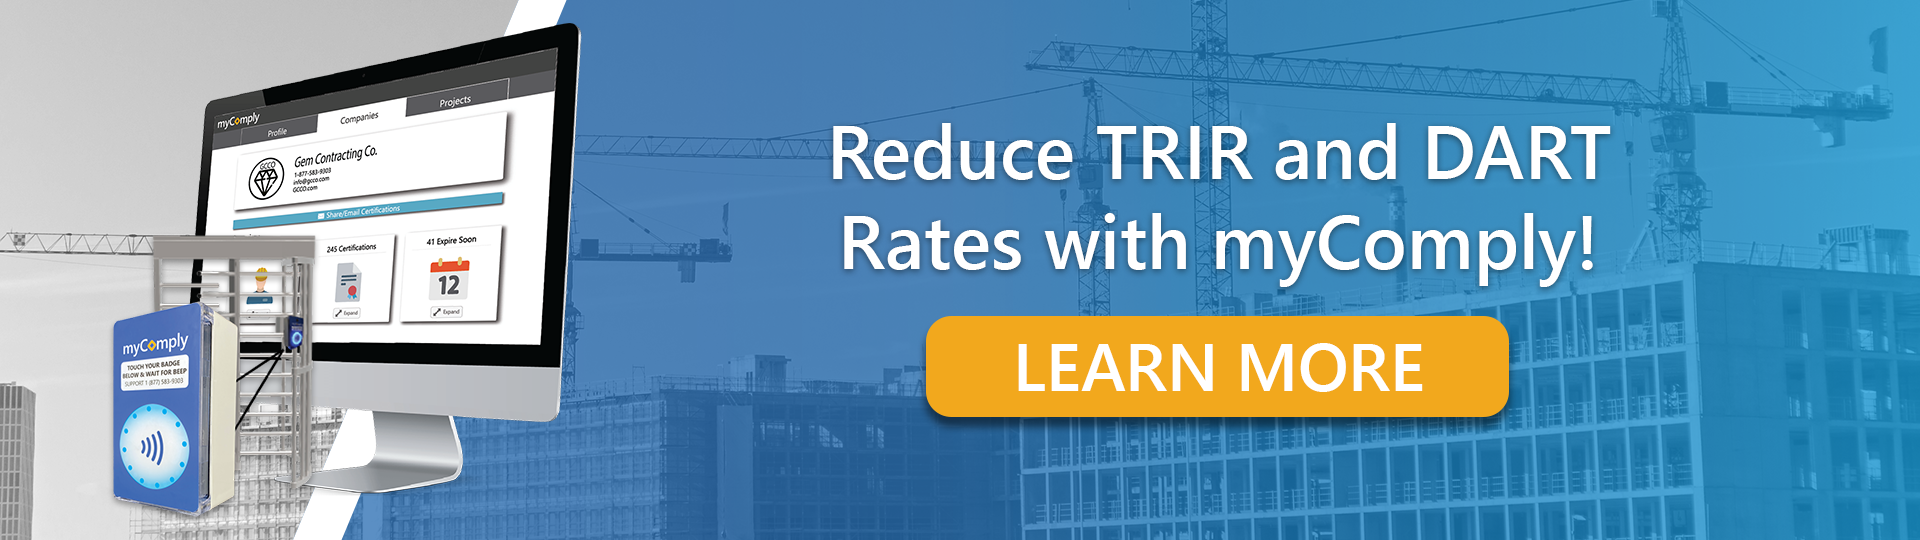 Reduce TRIR and DART Rates with myComply